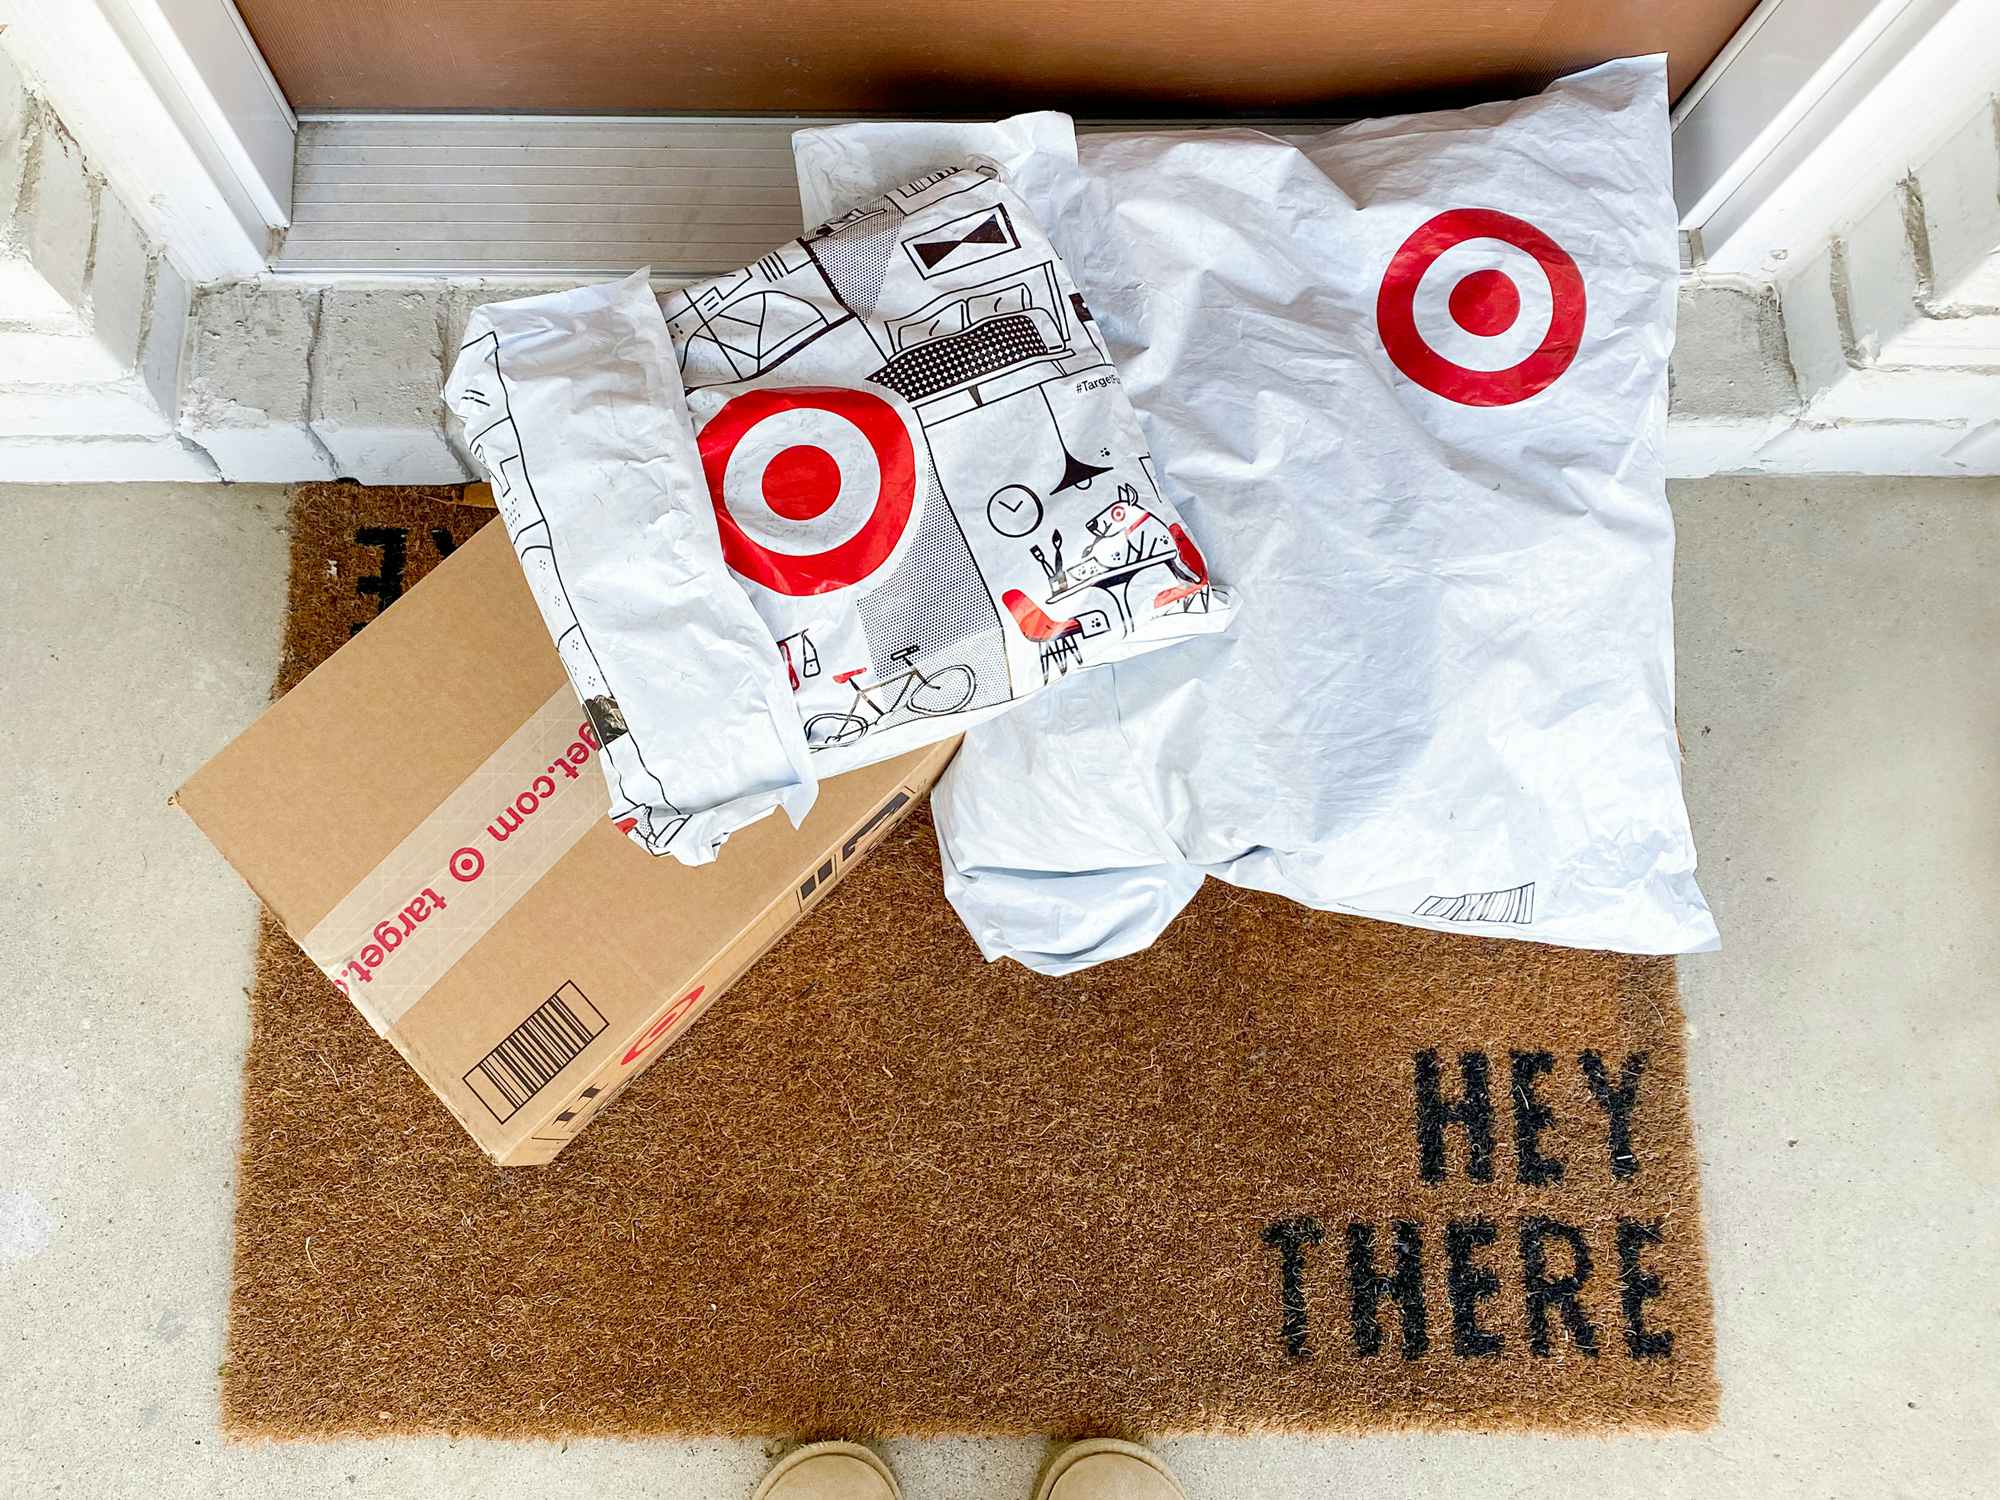 target holiday shopping packages delivered and sitting on someone's doorstep